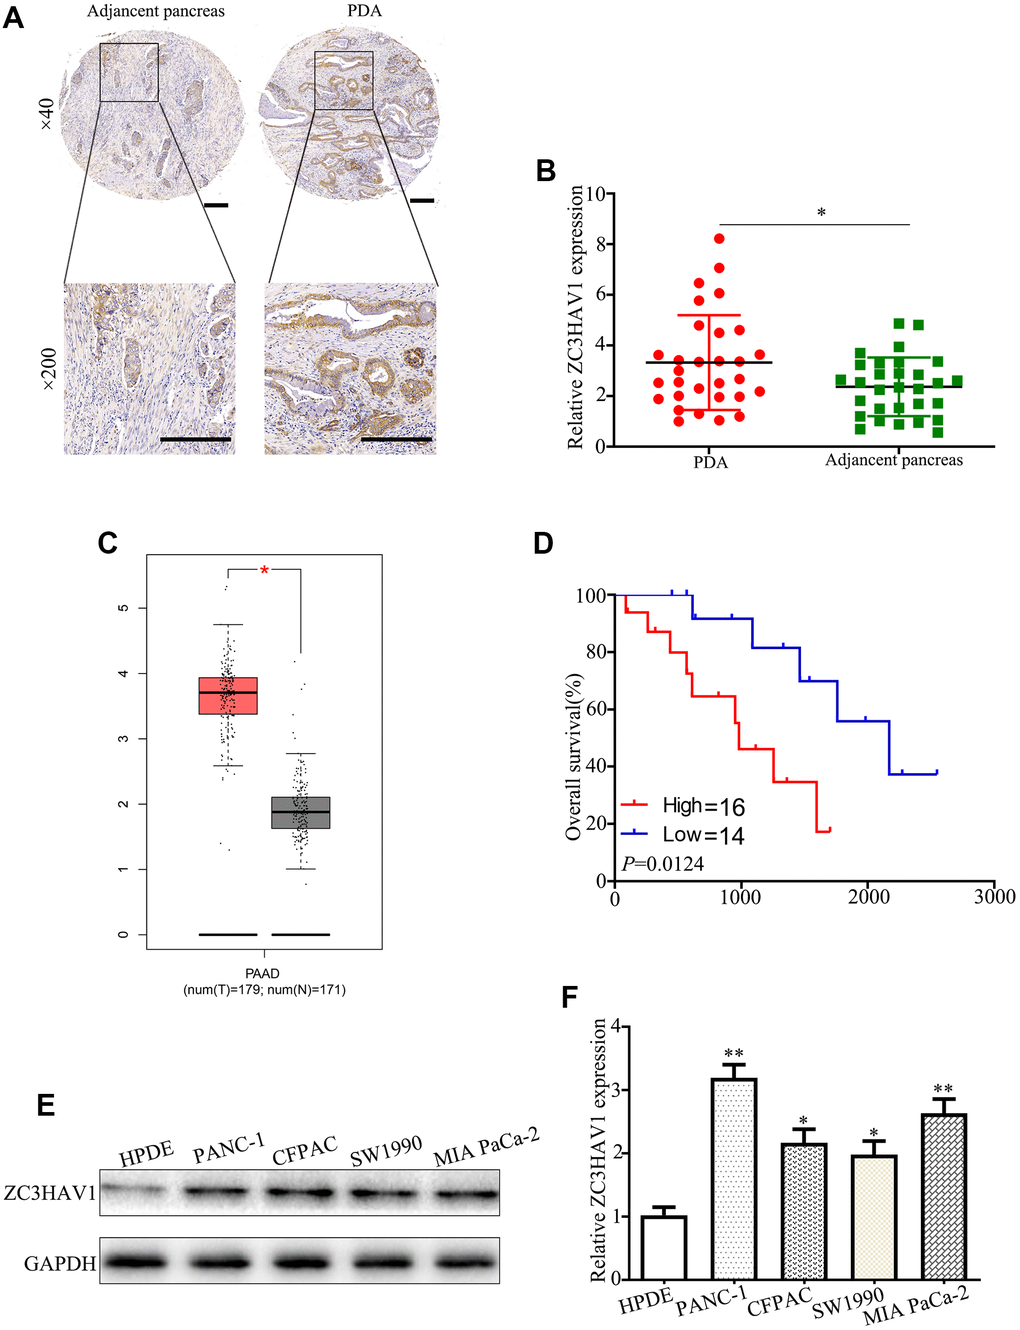 The associated expression of ZC3HAV1 was up-regulated in mankind PC tissues and cells and demonstrated poor prognosis. (A) Representative IHC images of ZC3HAV1 expression in PC tissues and matched adjacent non-tumor tissues (n=30) (scar bar: 50 μm). (B) Expression of ZC3HAV1 mRNA in 30 paired PC tissues and adjacent normal tissues was determined by qRT-PCR. (C) The expression of ZC3HAV1 in PC tissues and adjacent normal tissues built on the GEPIA database. (D) Kaplan-Meier survival curve generated in accordance to the ZC3HAV1 expression level. (E, F) The mRNA and protein expression of ZC3HAV1 in PC cell lines and in human pancreas ductal epithelial cell line (HPDE). Data appeared to be average ± SD, *PP